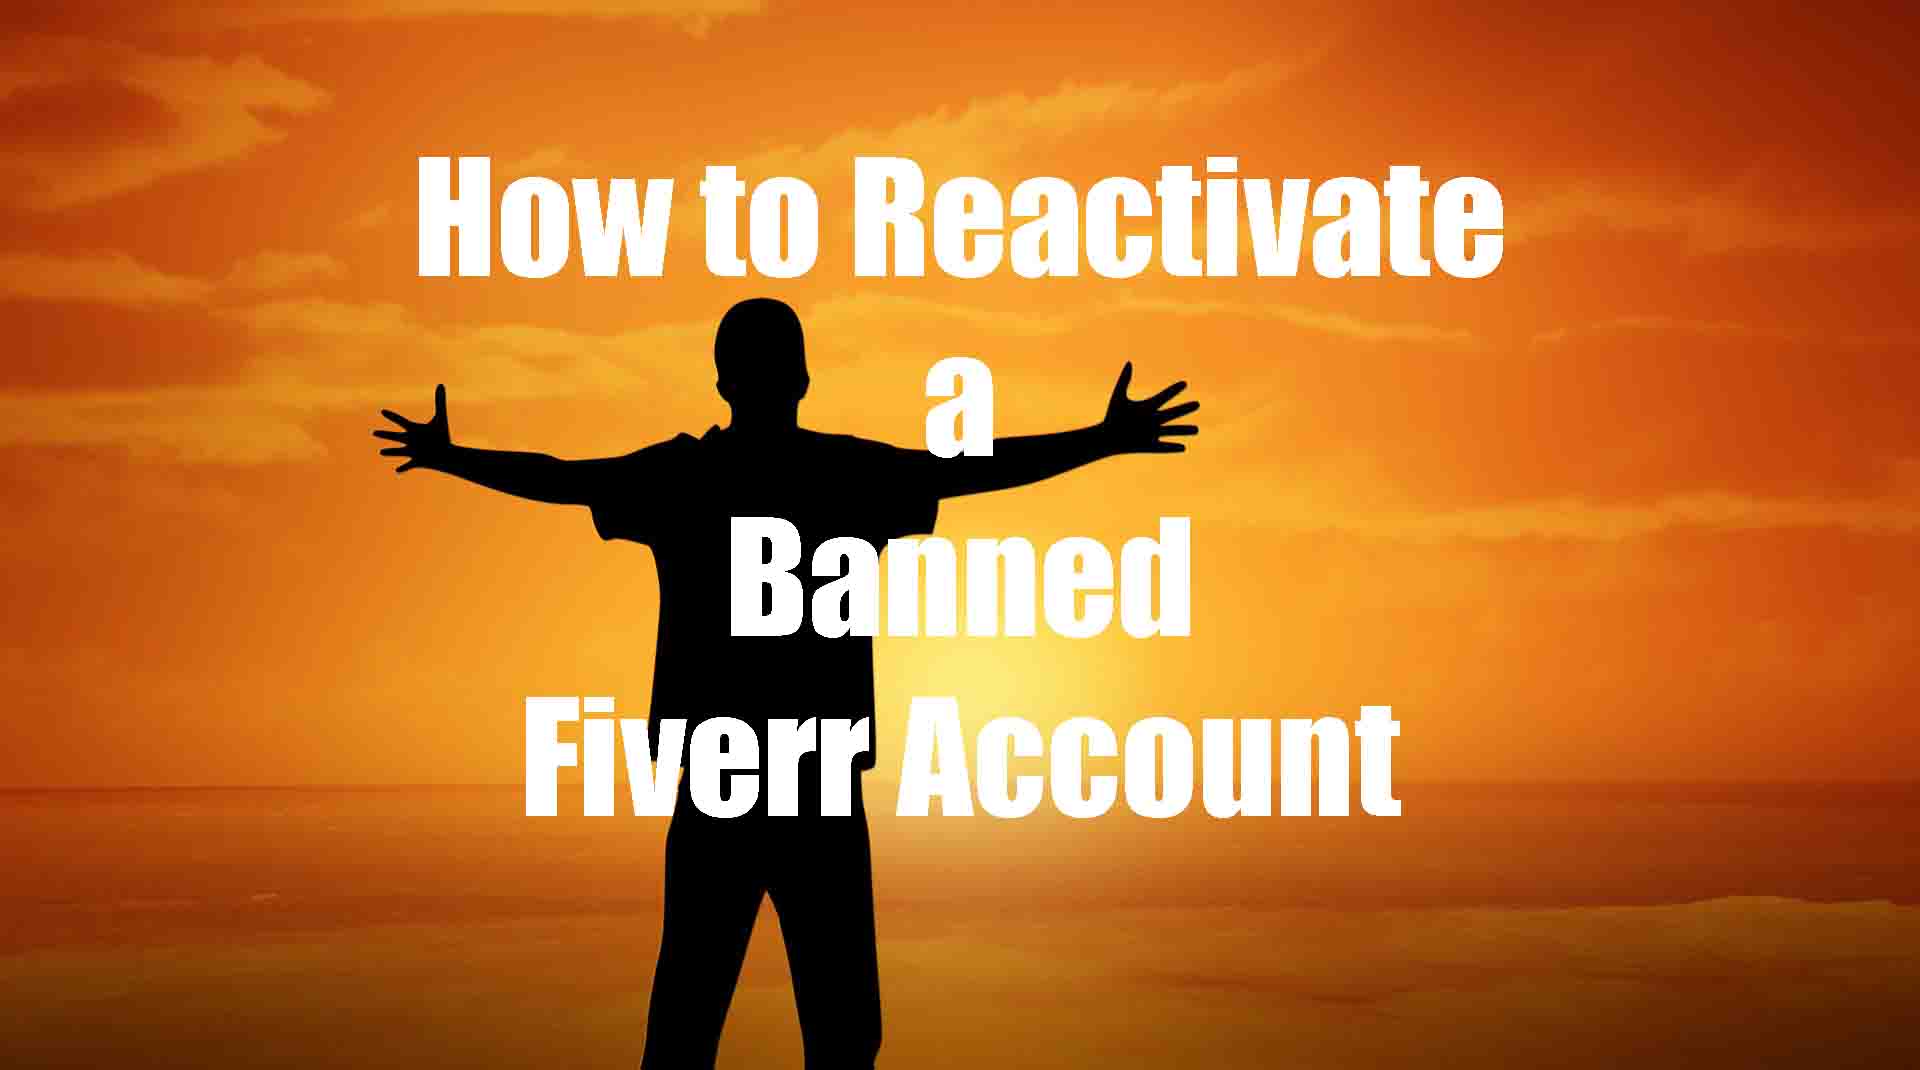 How to reactivate a banned Fiverr account